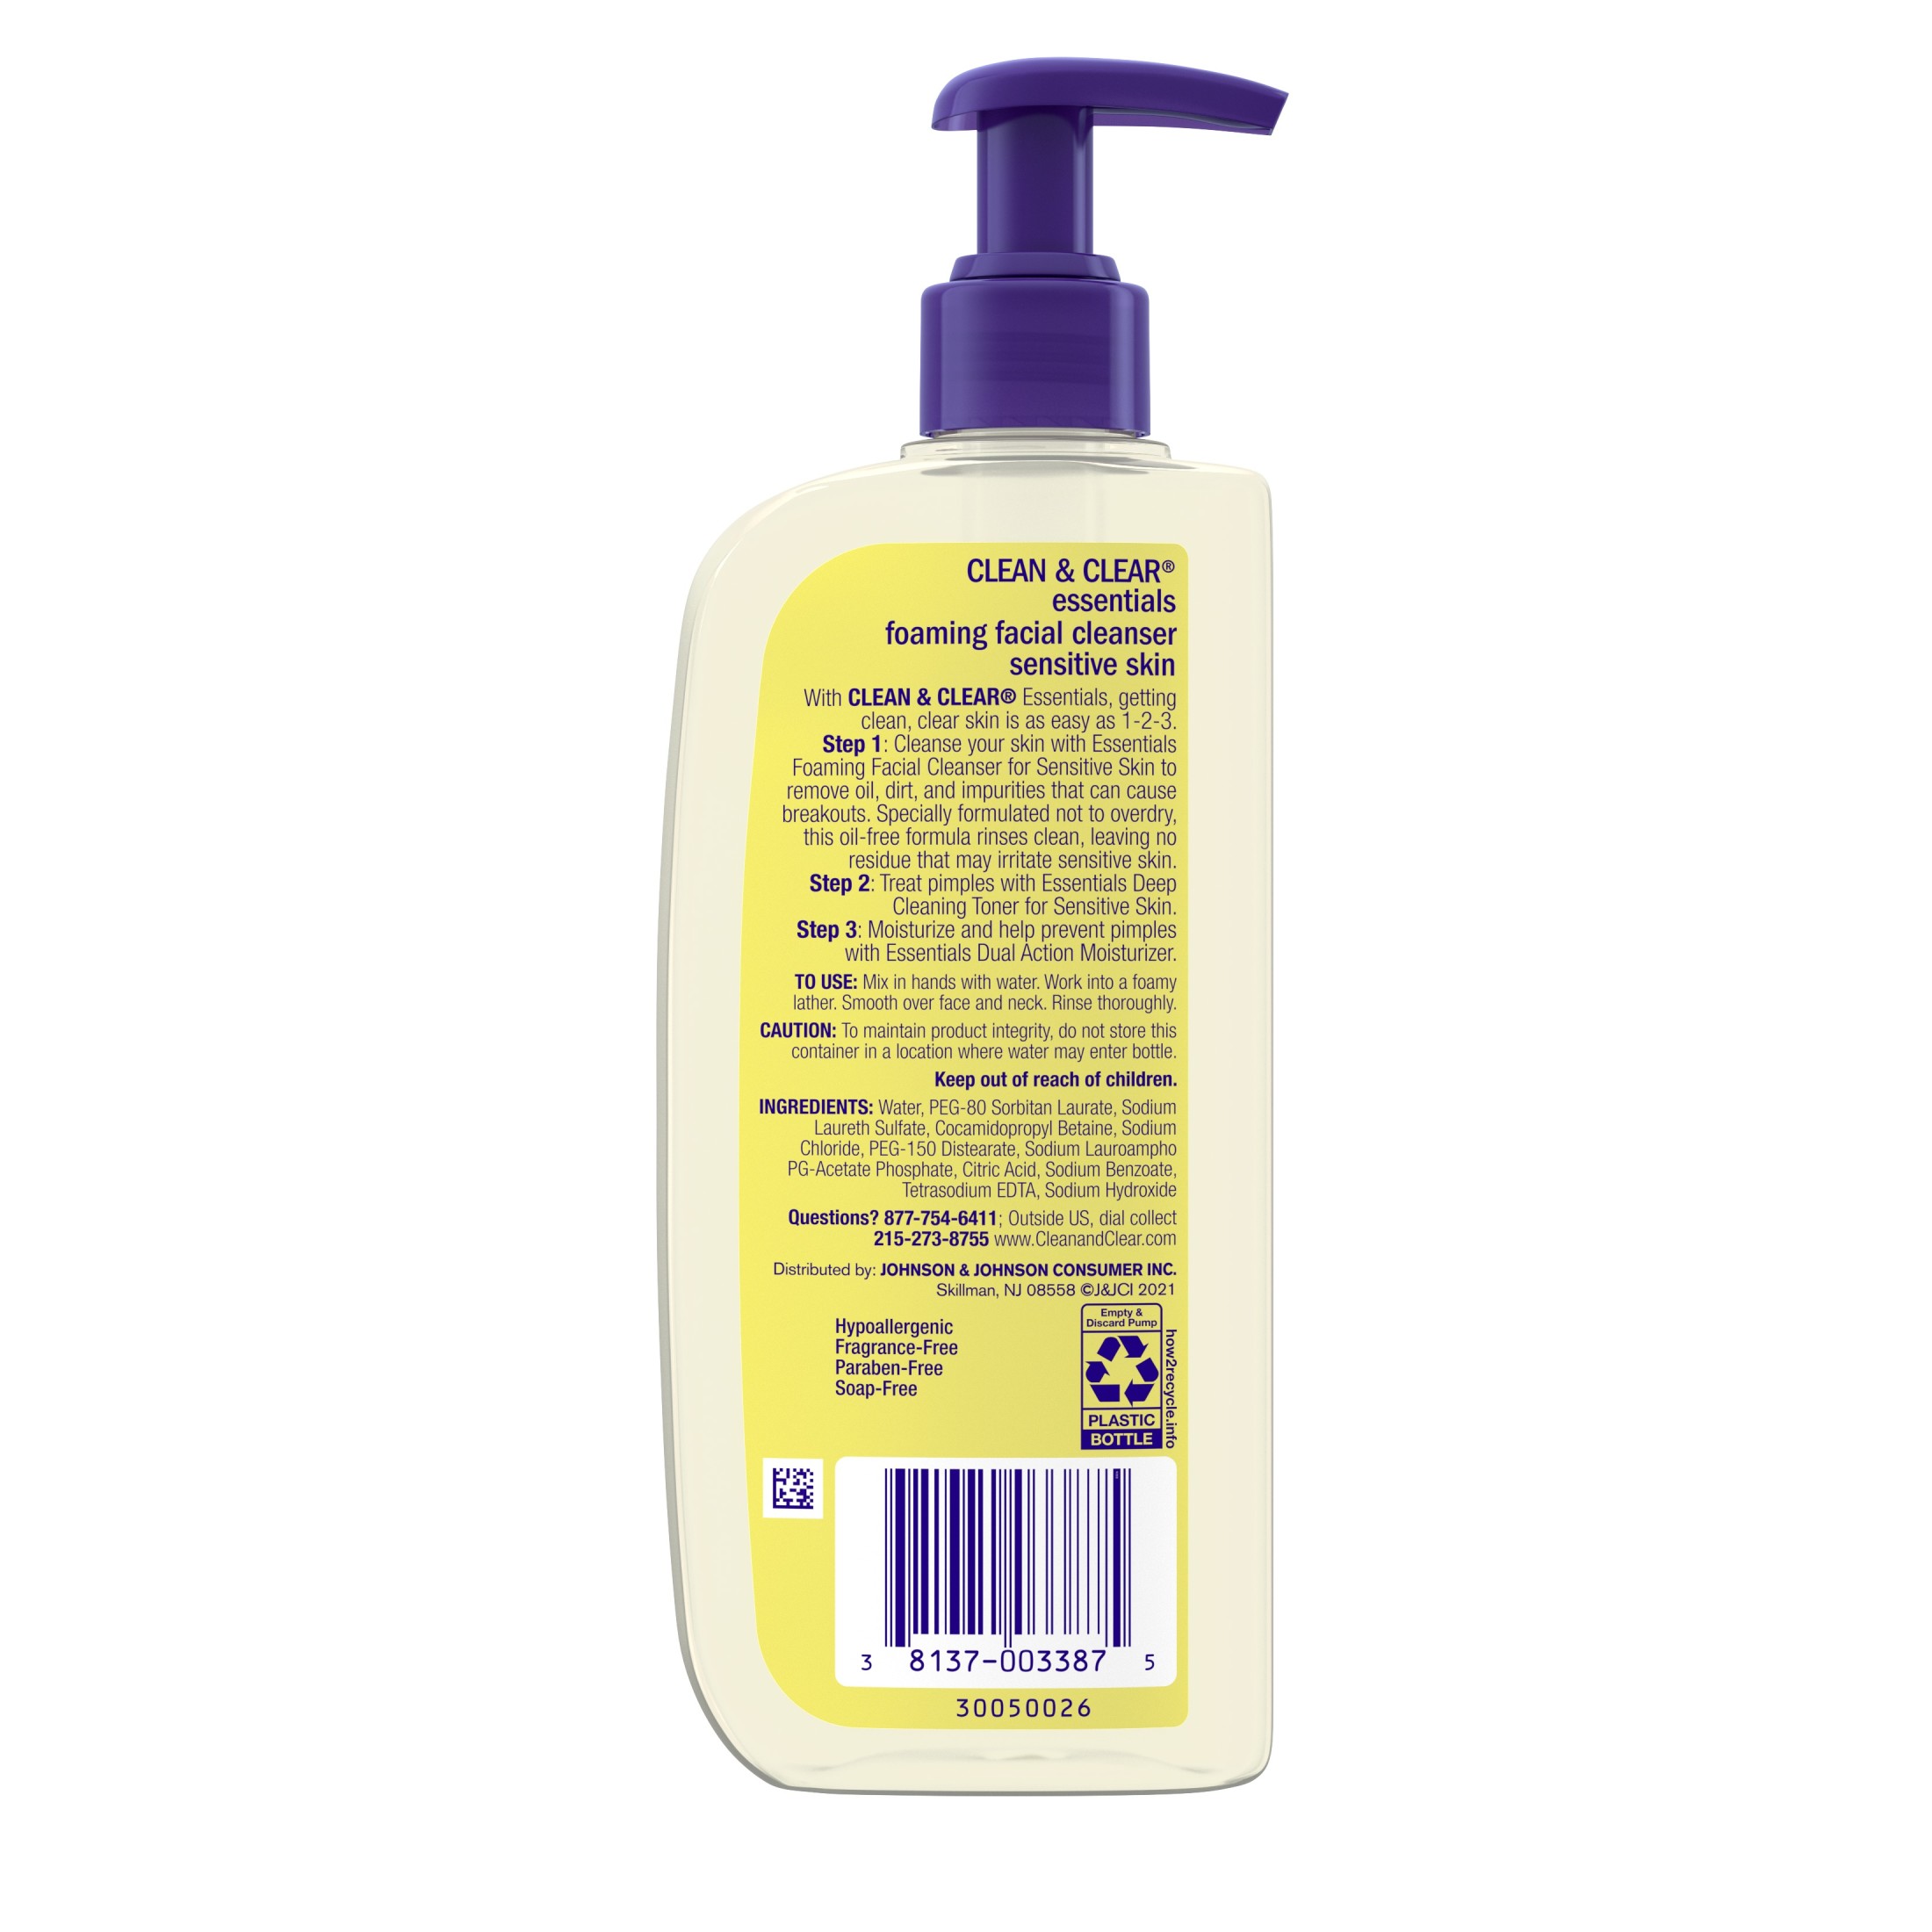 Clean & Clear Essentials Foaming Face Wash for Sensitive Skin 8 fl. oz - image 2 of 8